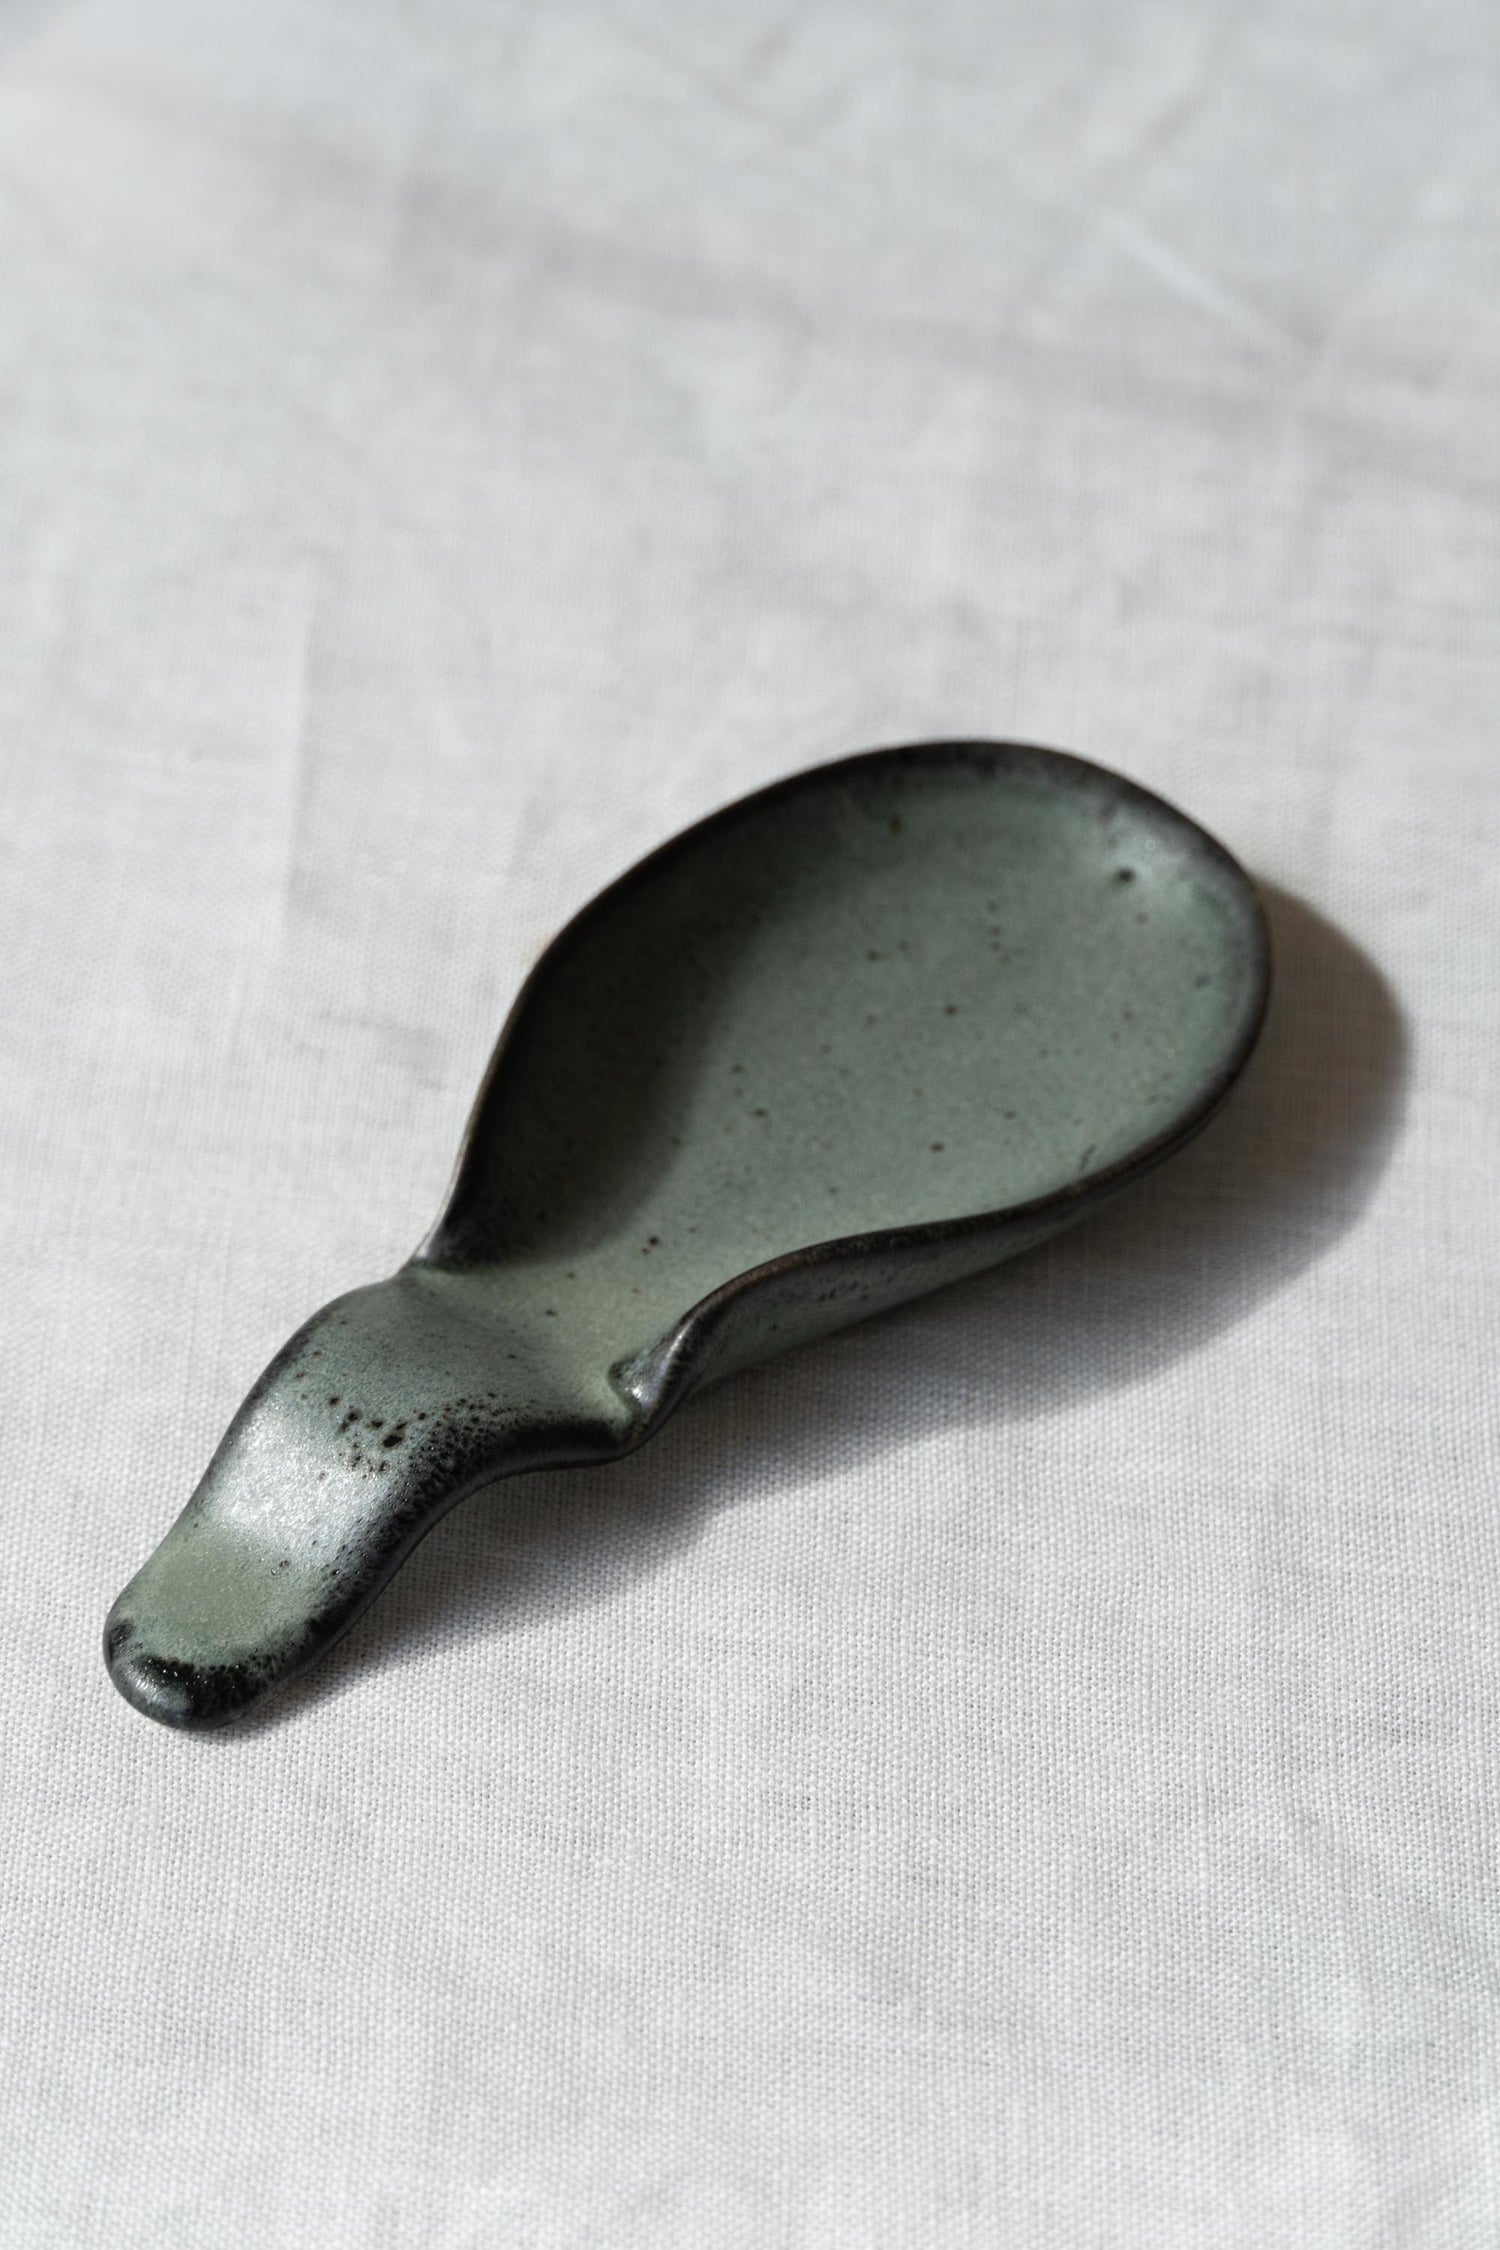 Details of the Dashi Kome Spoon Charbon by Jars Ceramistes.